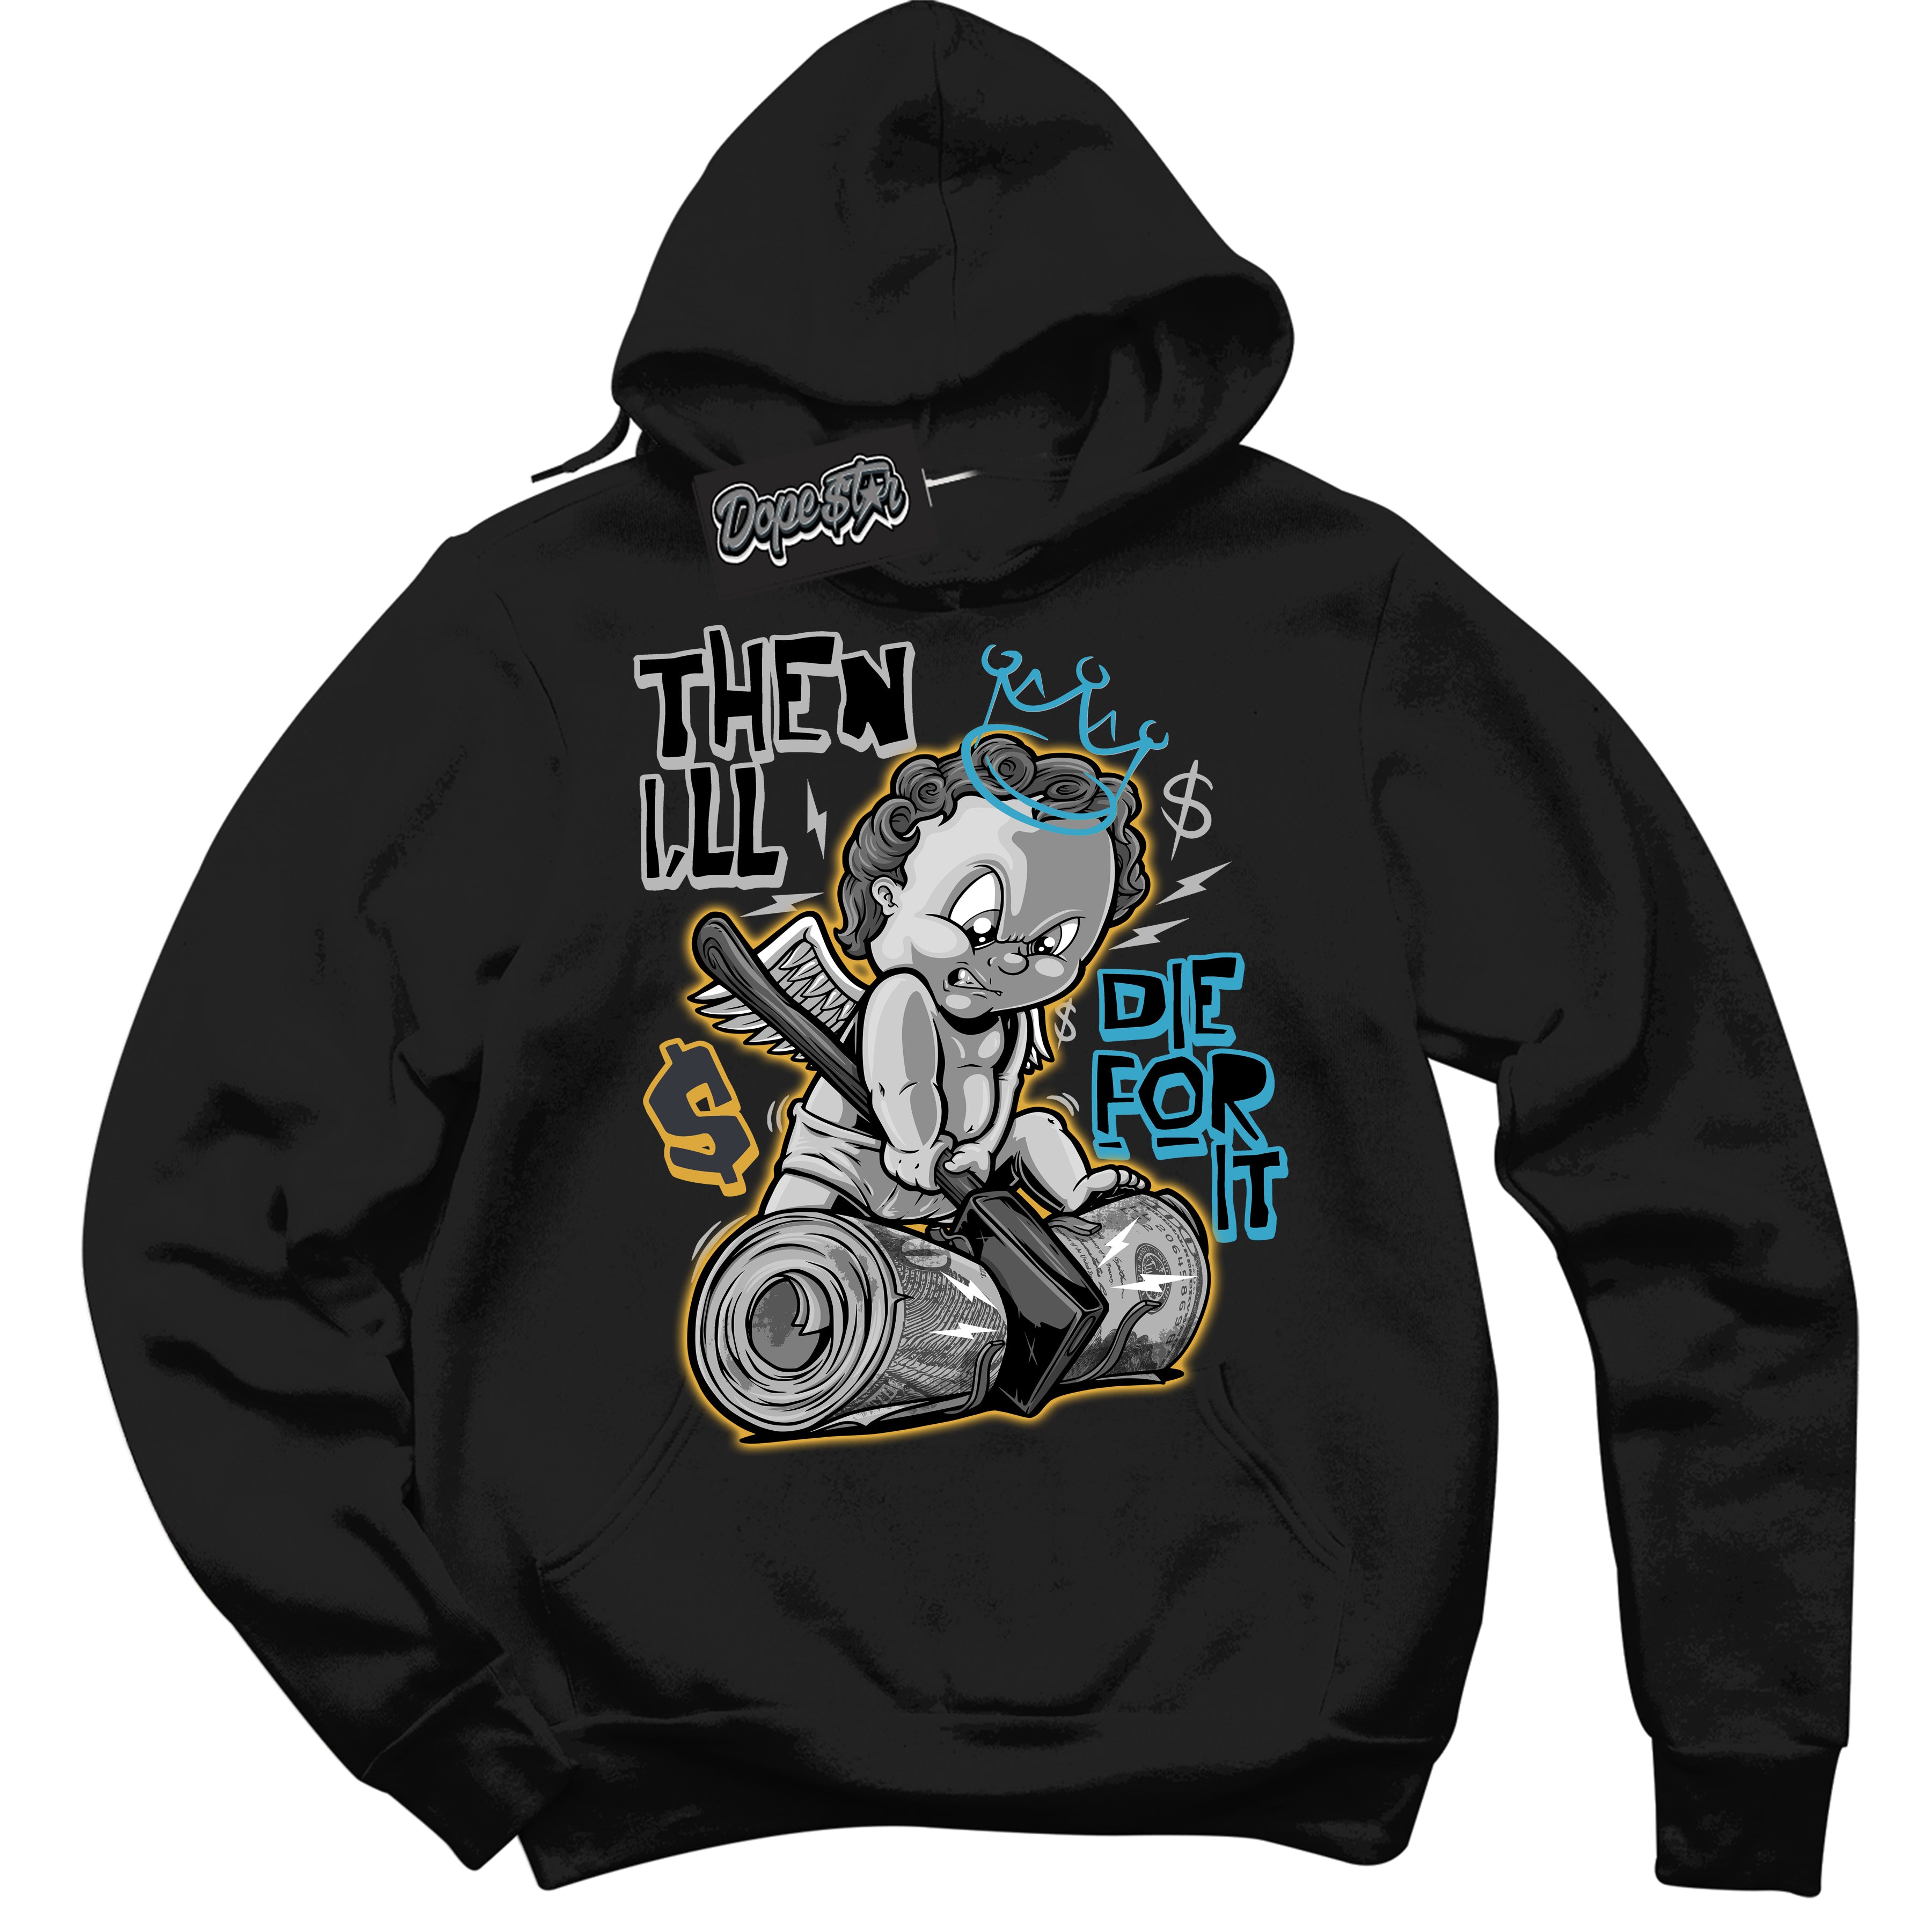 Cool Black Hoodie with “ Then I'll ”  design that Perfectly Matches Aqua 5s Sneakers.